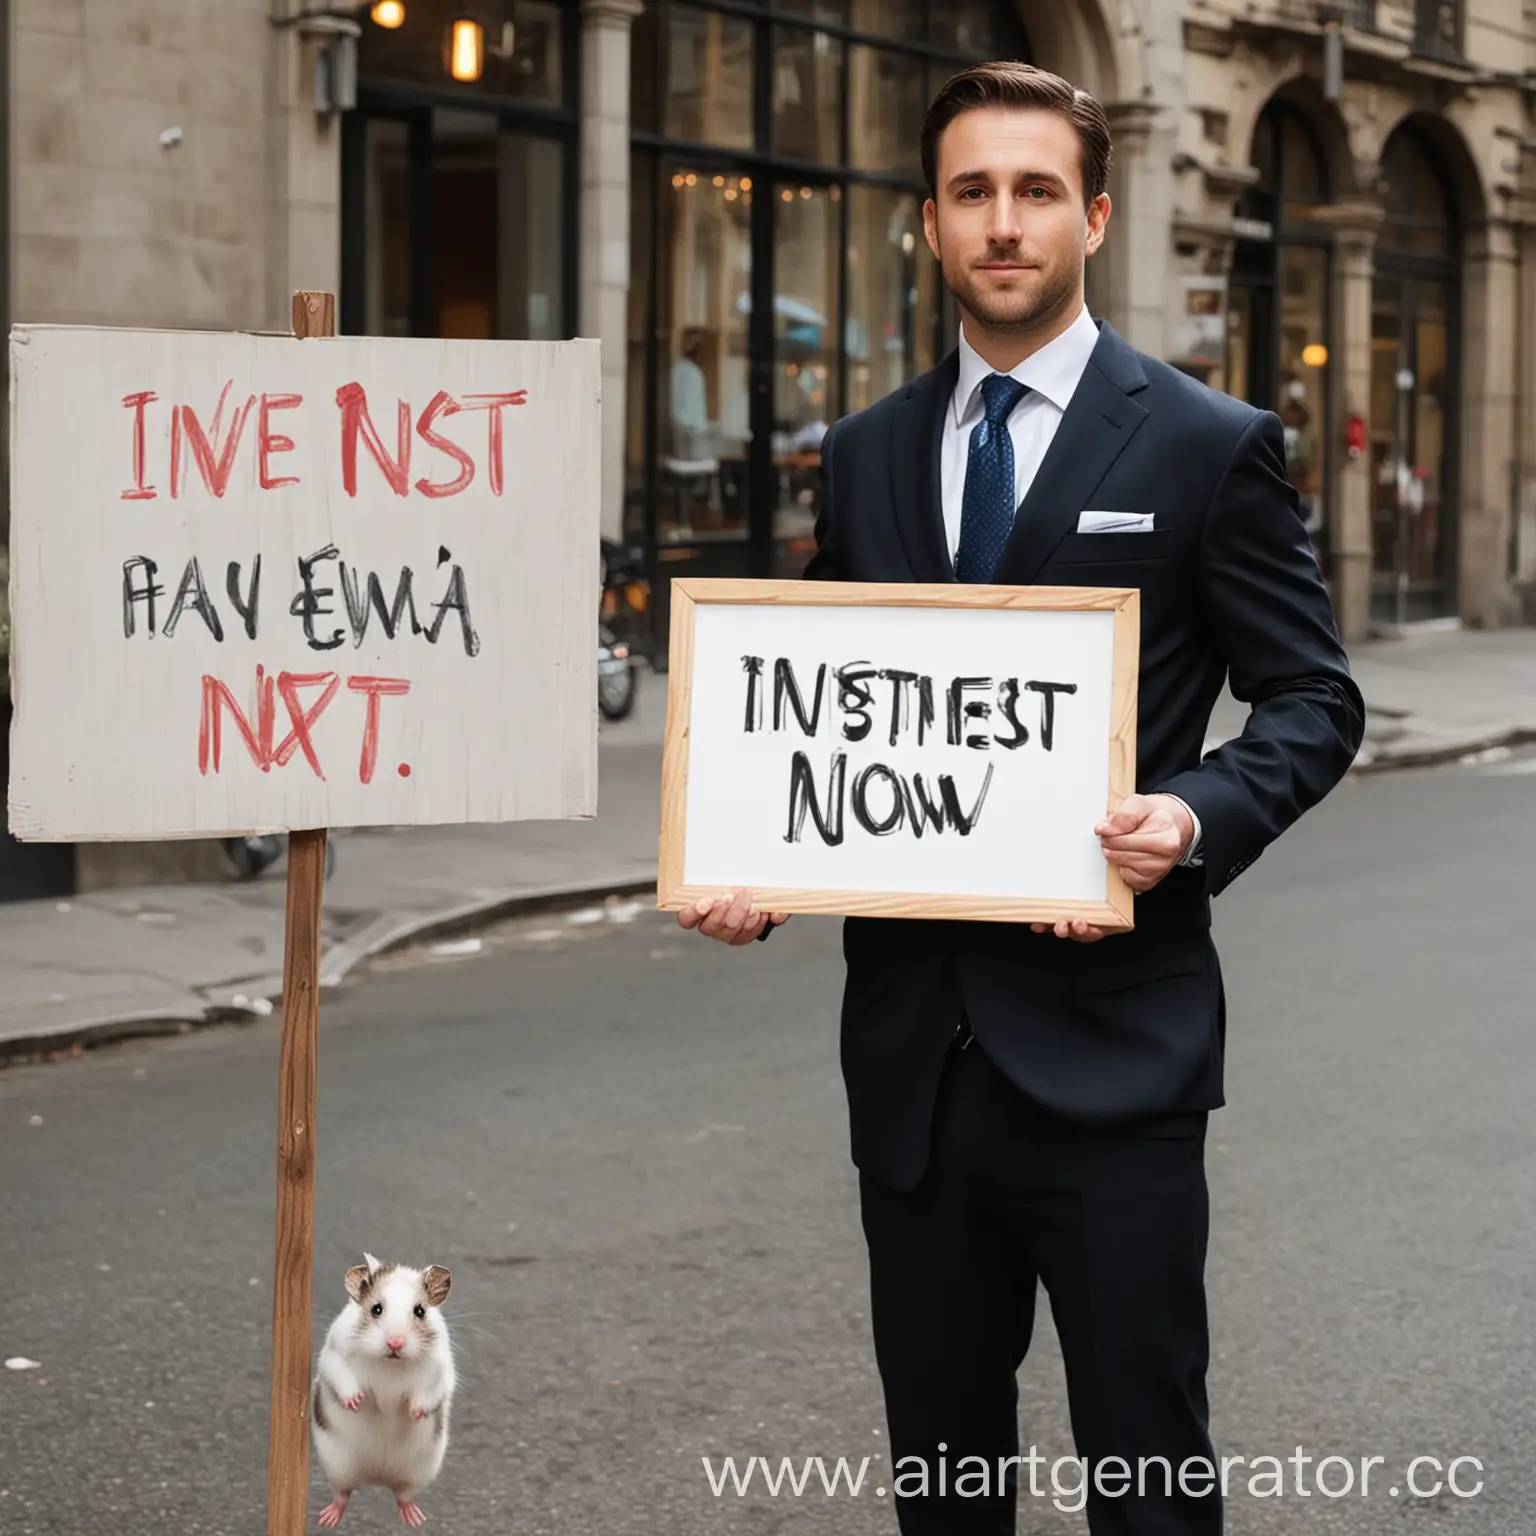 Businessman-Urges-Investment-with-Invest-Now-Sign-Rejecting-Hamster-Strategy